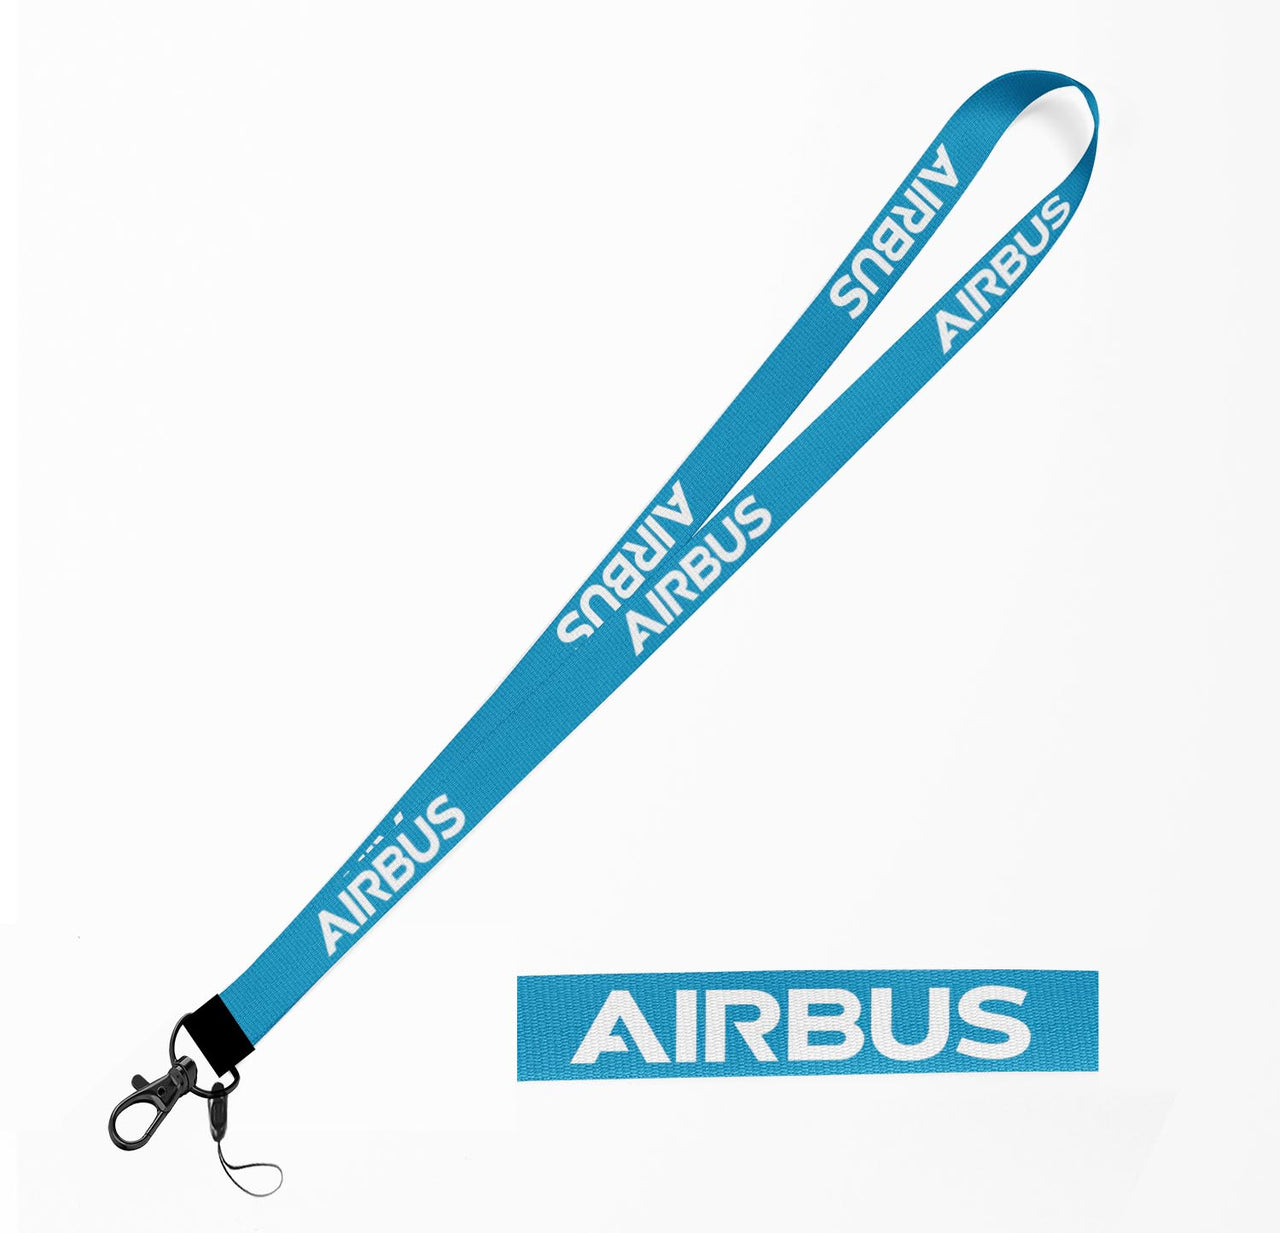 Airbus & Text Designed Lanyard & ID Holders